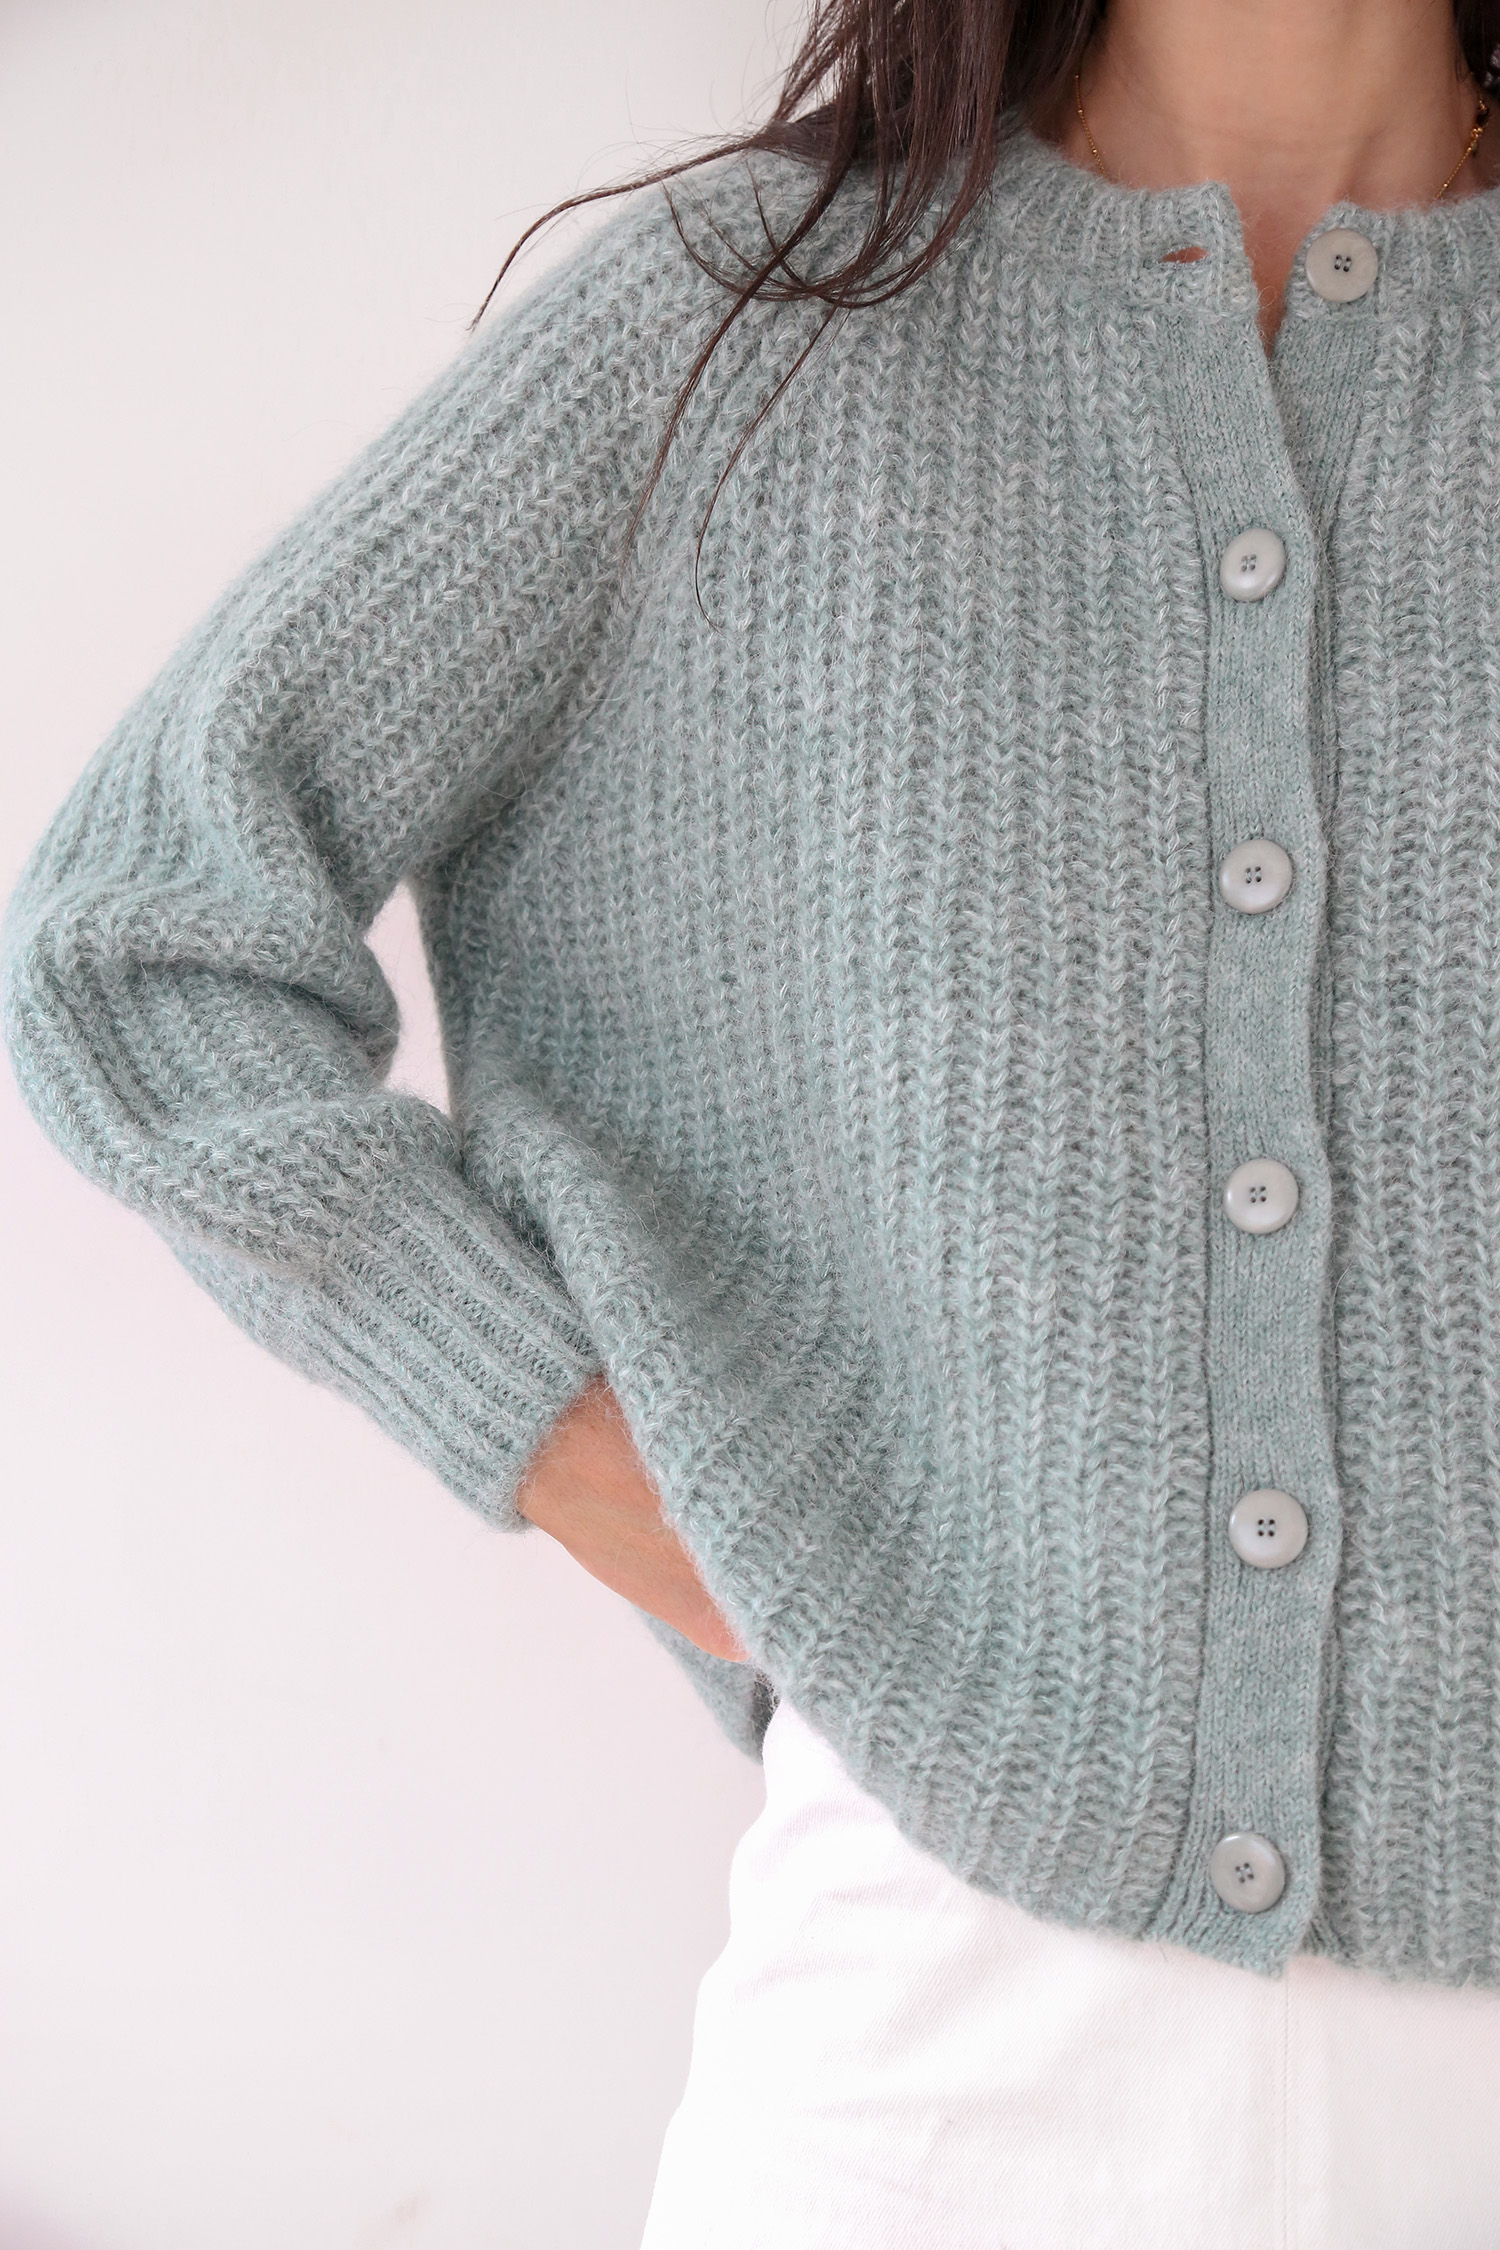 French style knit sweater